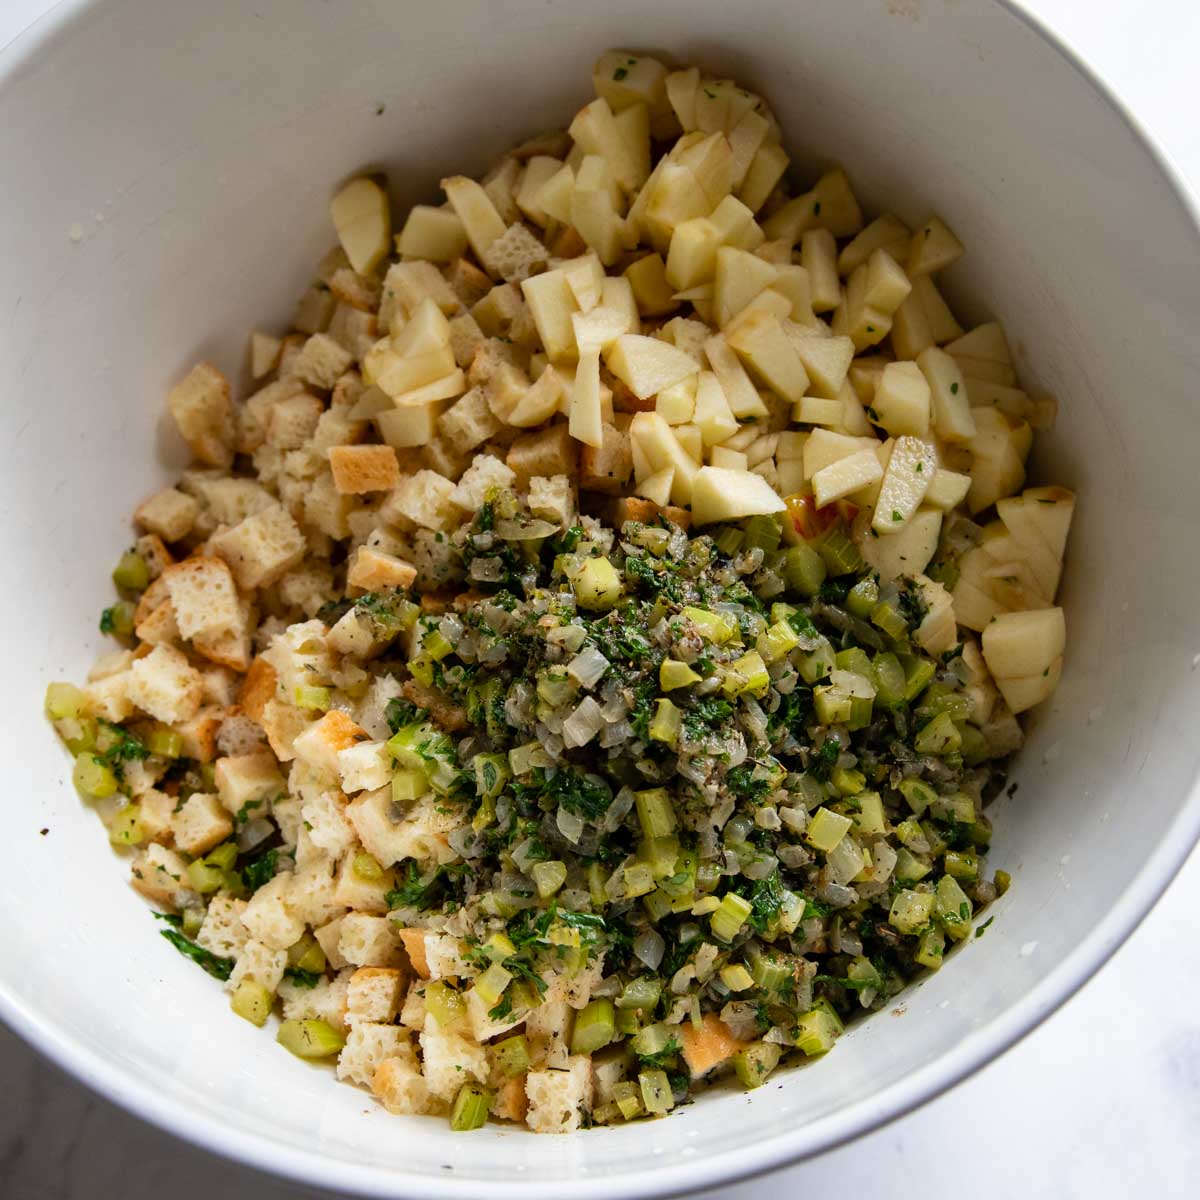 stuffing ingredients combined in a bowl.